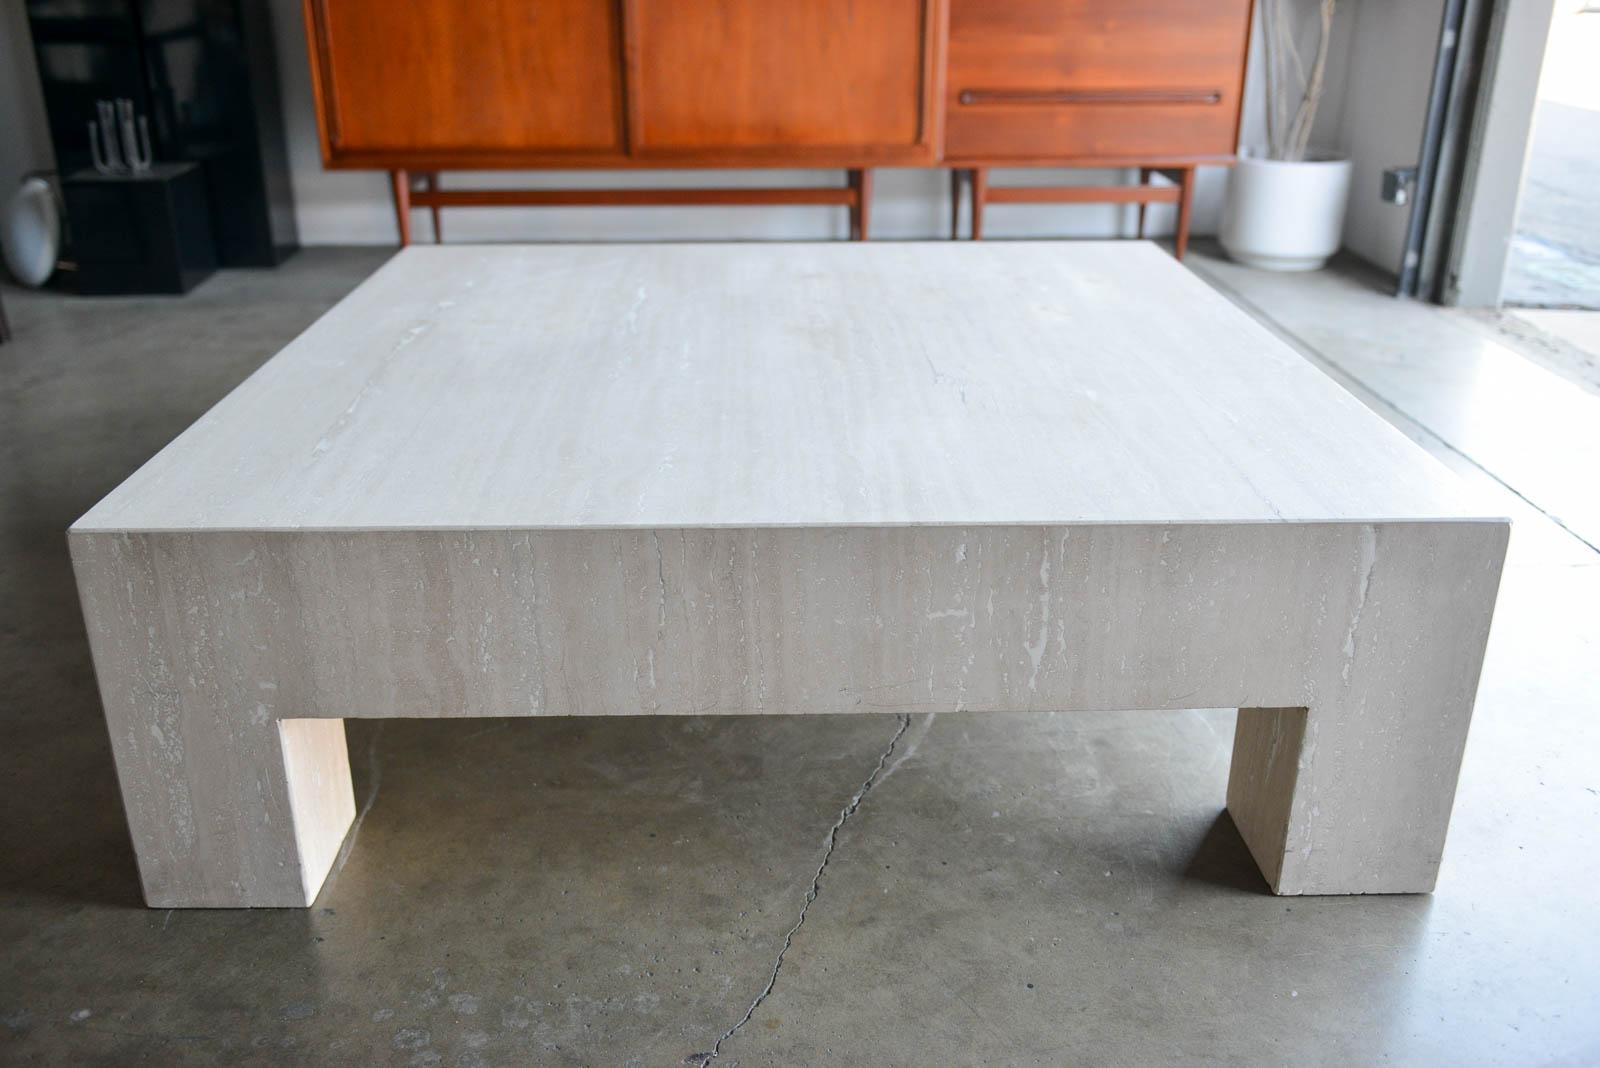 Square travertine coffee table, circa 1980. Very good vintage condition, no cracks. Slight wear as shown. Could be used indoors or outdoors on patio.

Measures: 48